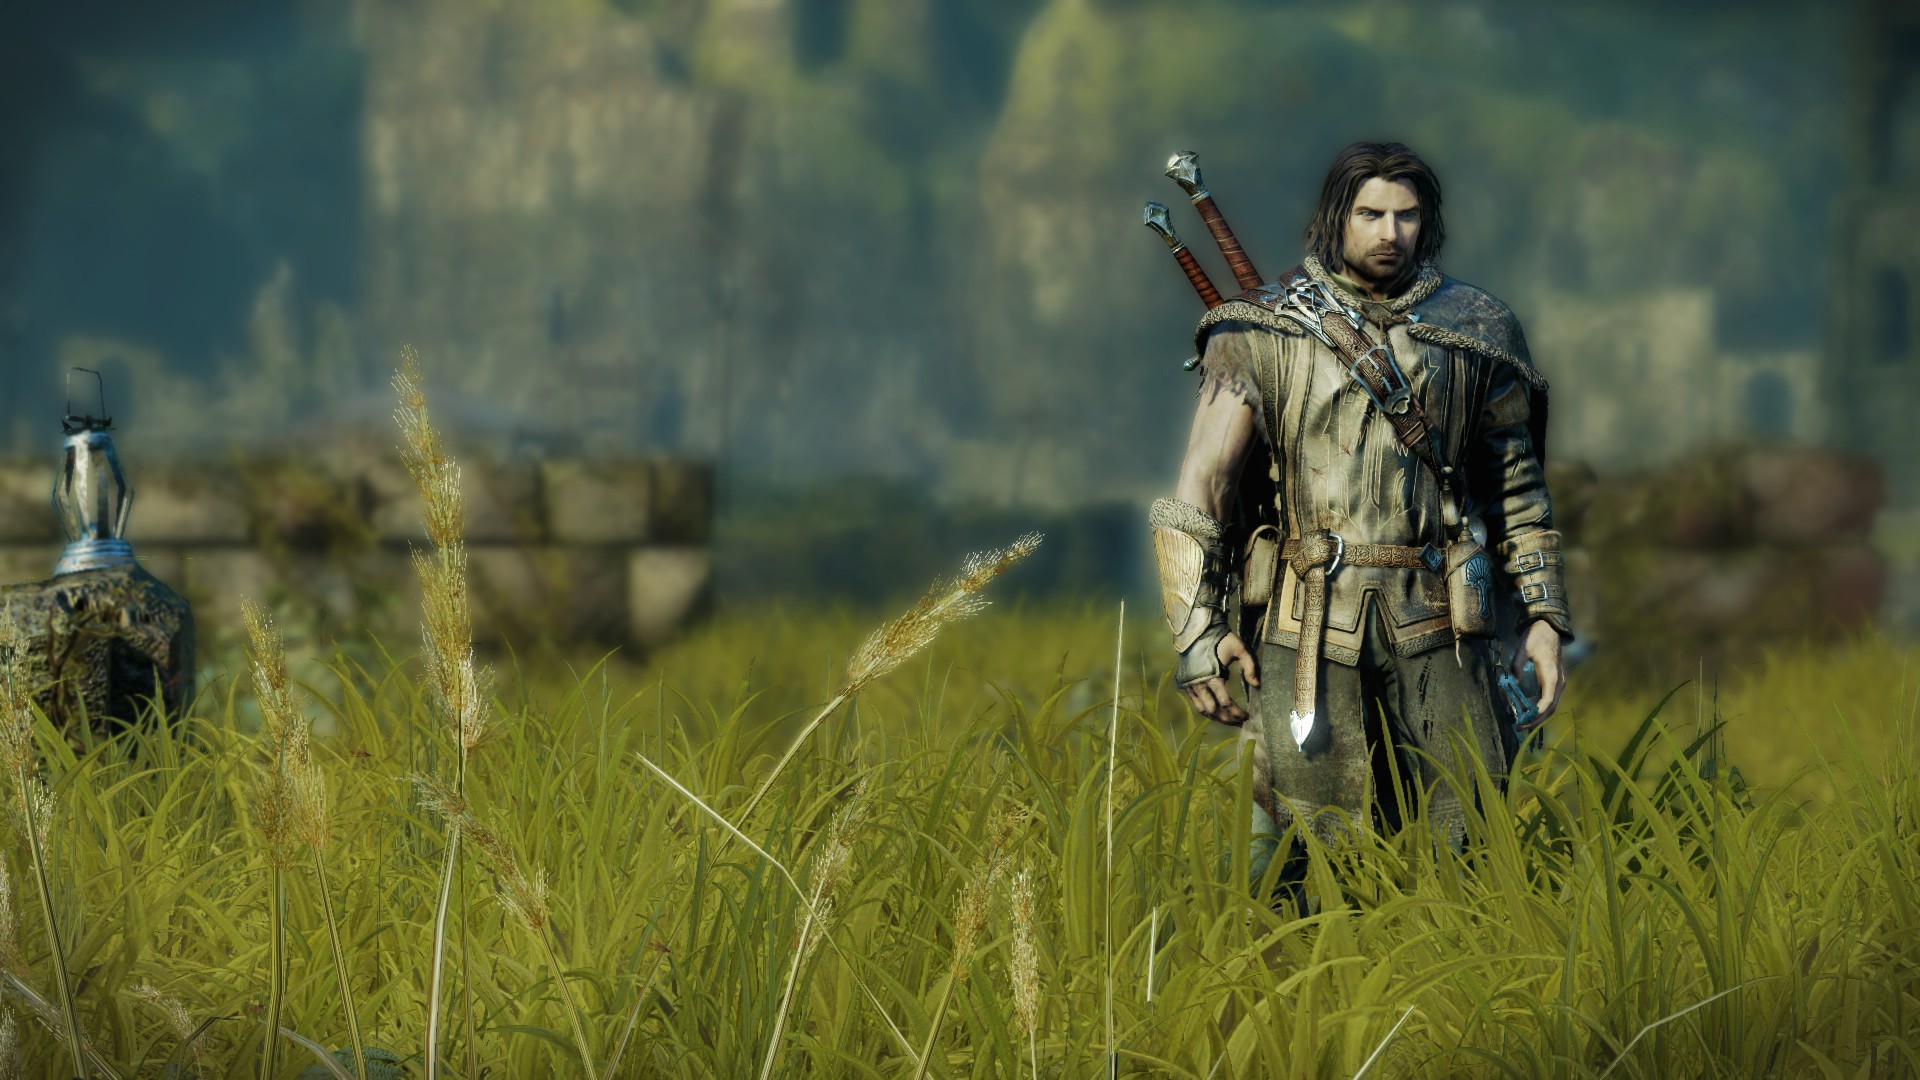 Middle earth : Shadow of Mordor, Talion, Shadow of Mordor Wallpaper